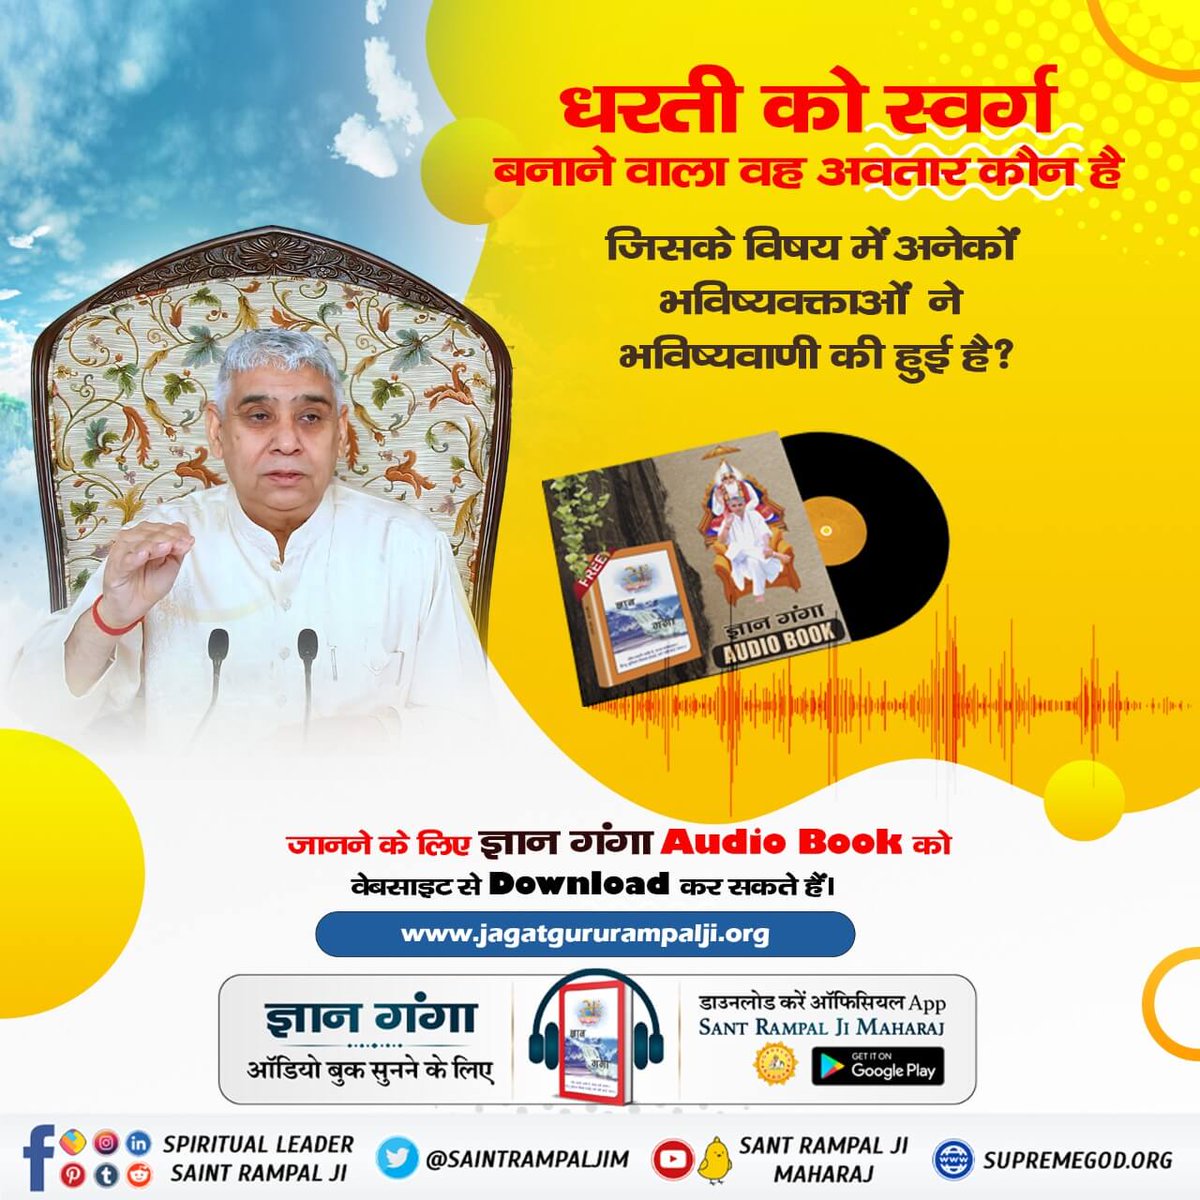 How did Brahma, Vishnu, Mahesh originate? To know must listen Gyan Ganga audio book. You can listen to this audio book on 'Sant Rampal Ji Maharaj' YouTube channel.
Audio Book 'Sant Rampal Ji Maharaj' is also available on the App.
#wednesdaythought